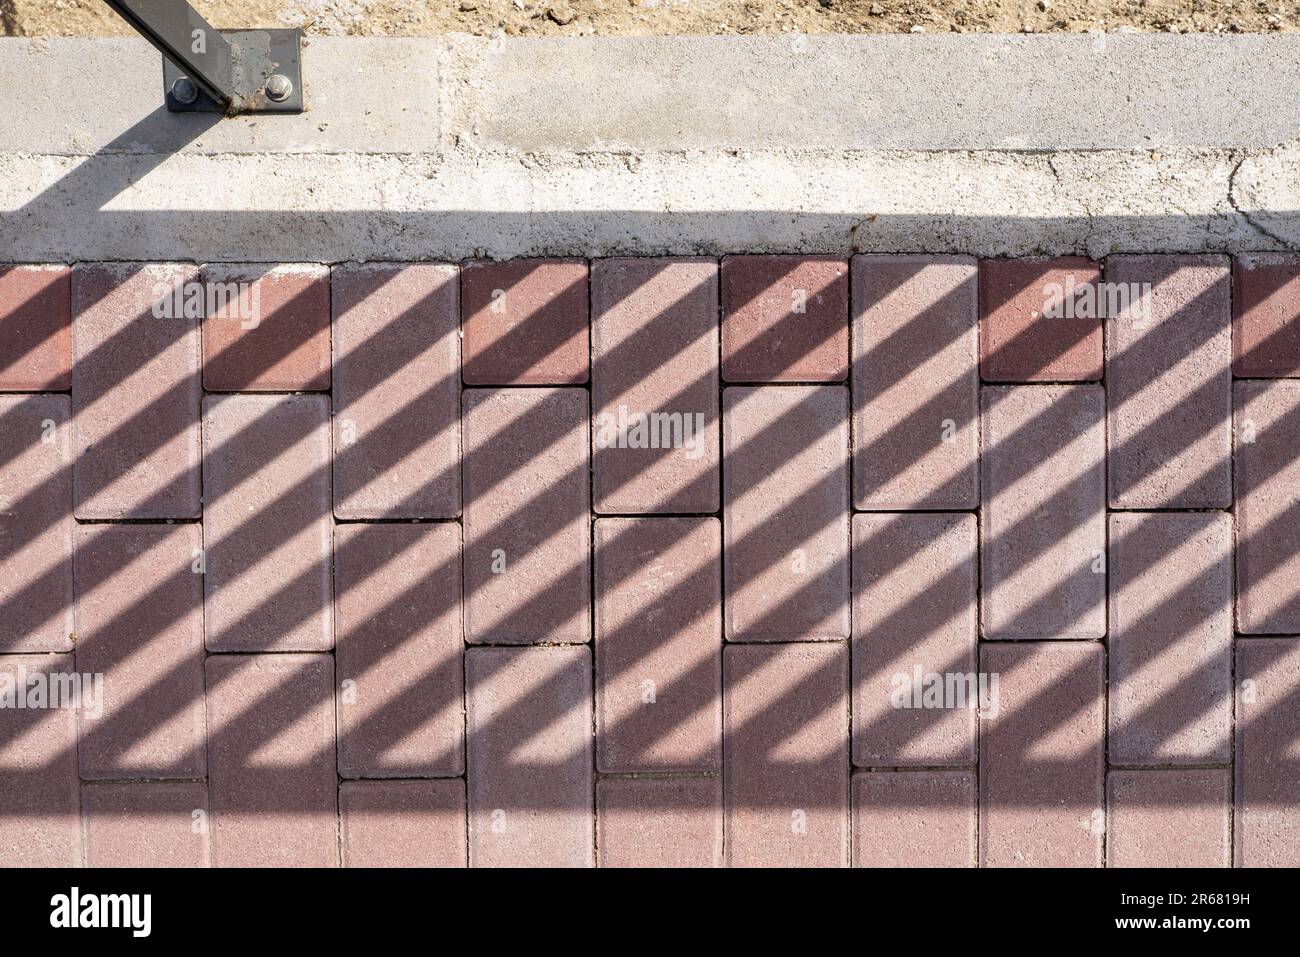 Brown colored paving bricks with shadows from a railing Stock Photo